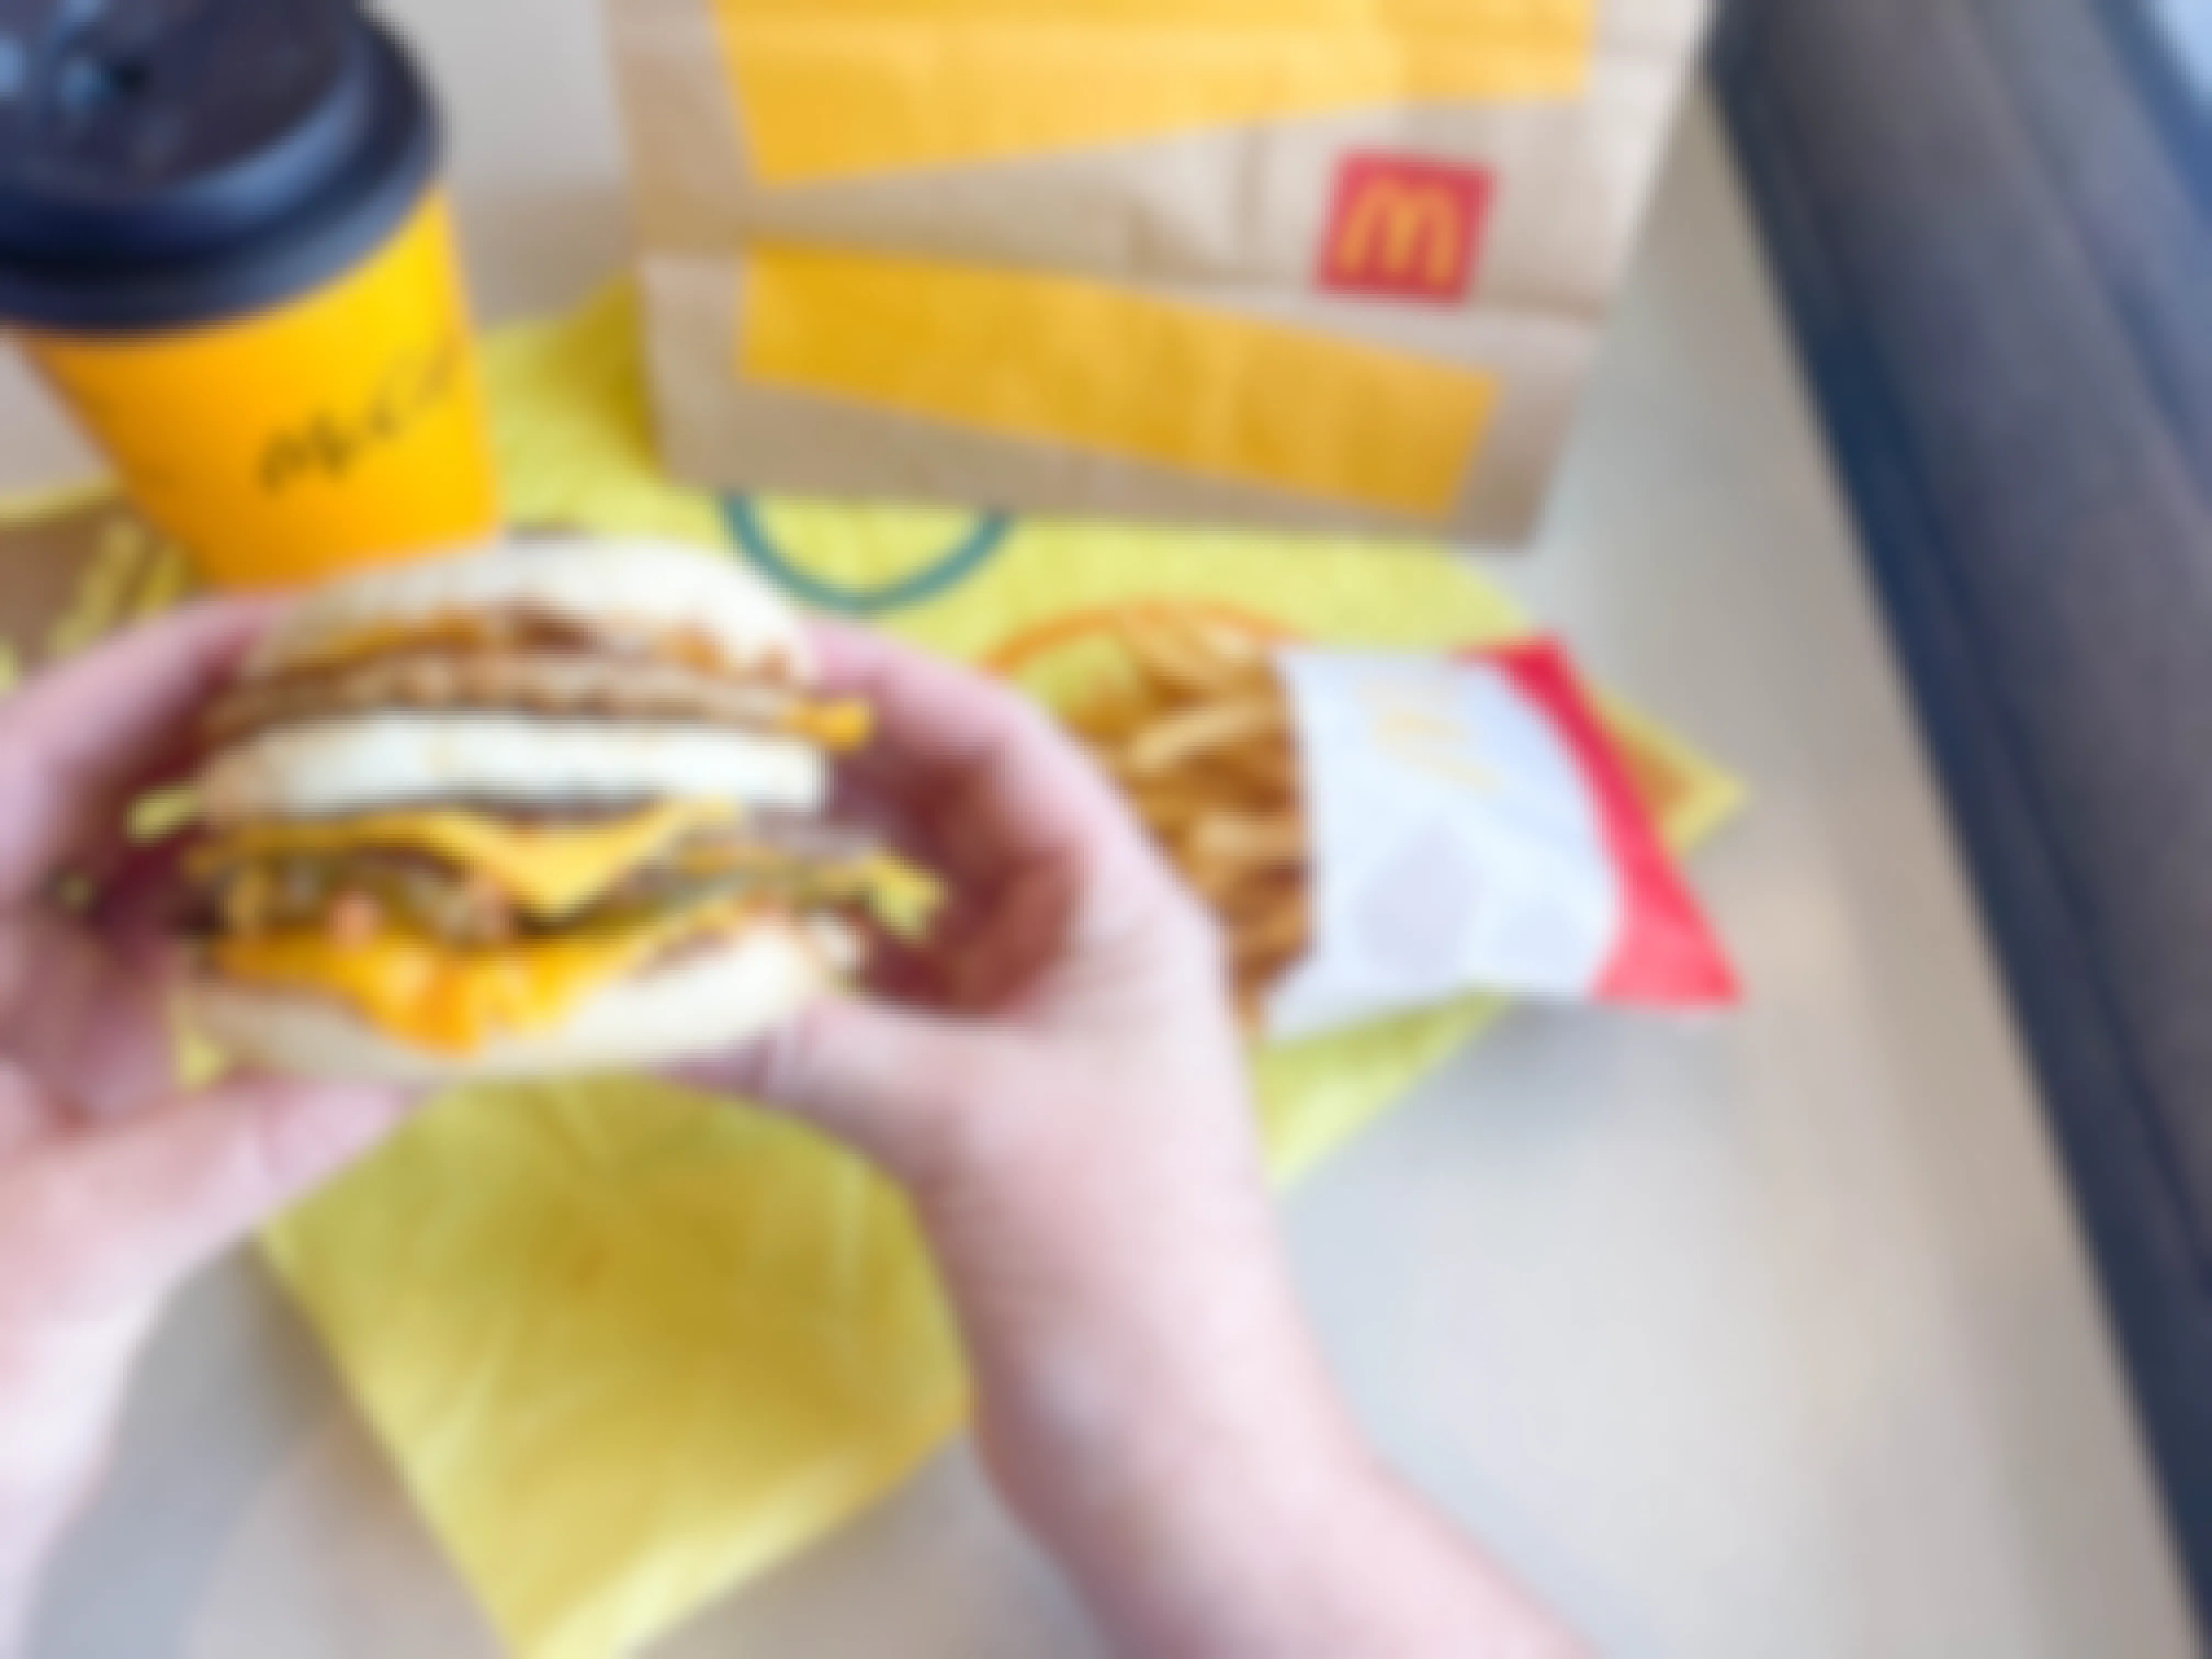 mcdonalds secret menu mcmuffin wand freis on table with mcmuffin being held